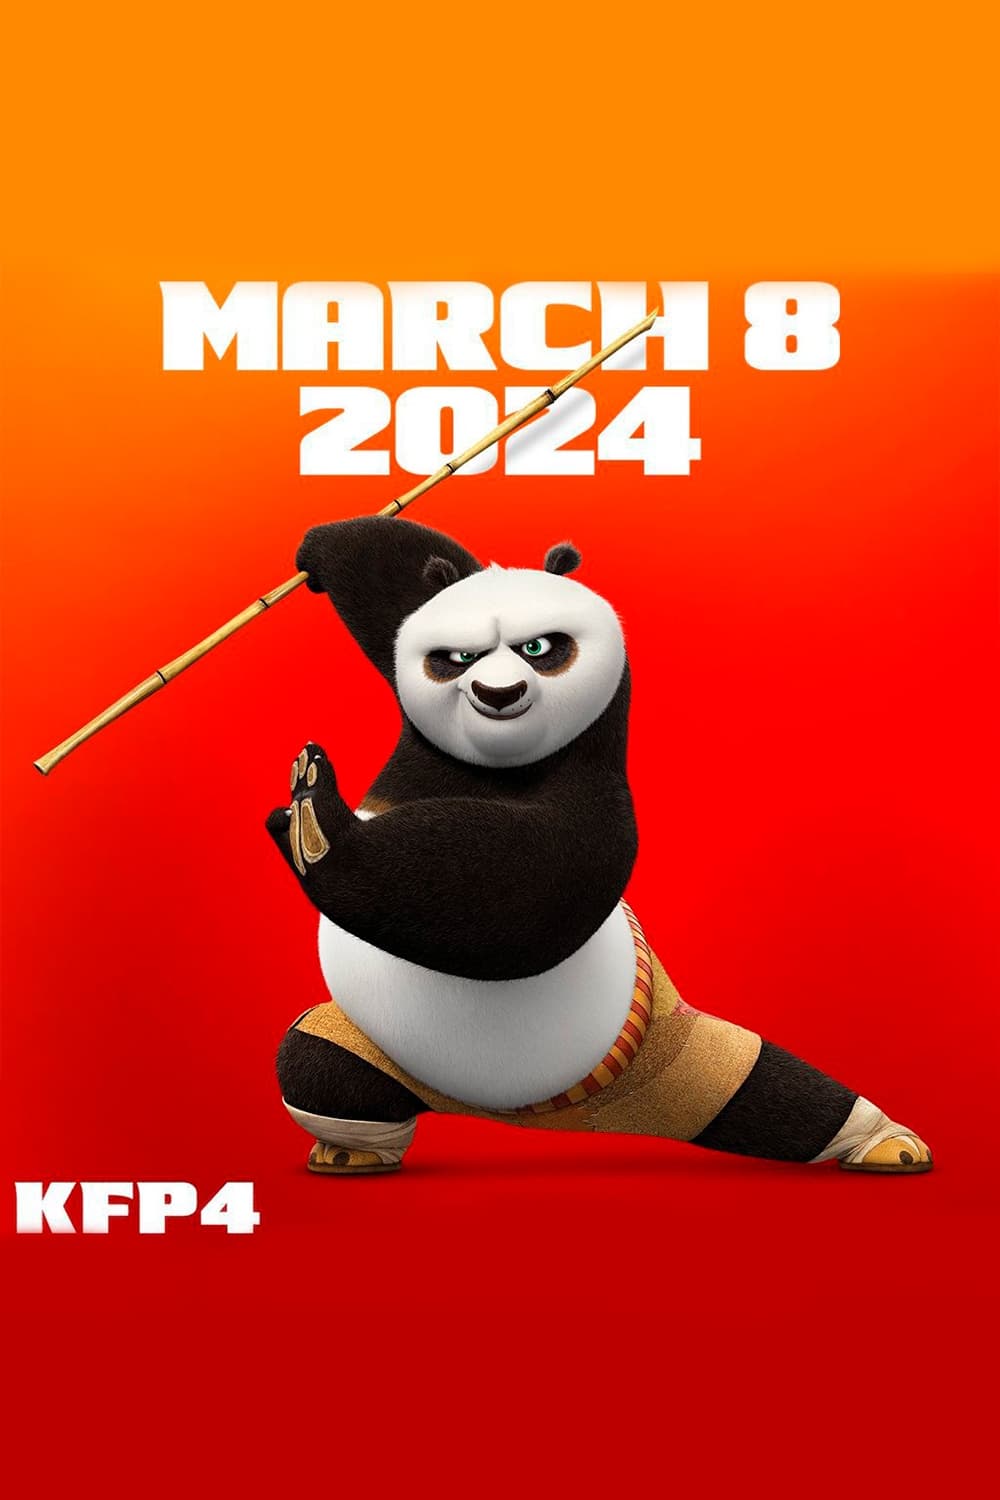 Poster for the movie "Kung Fu Panda 4"